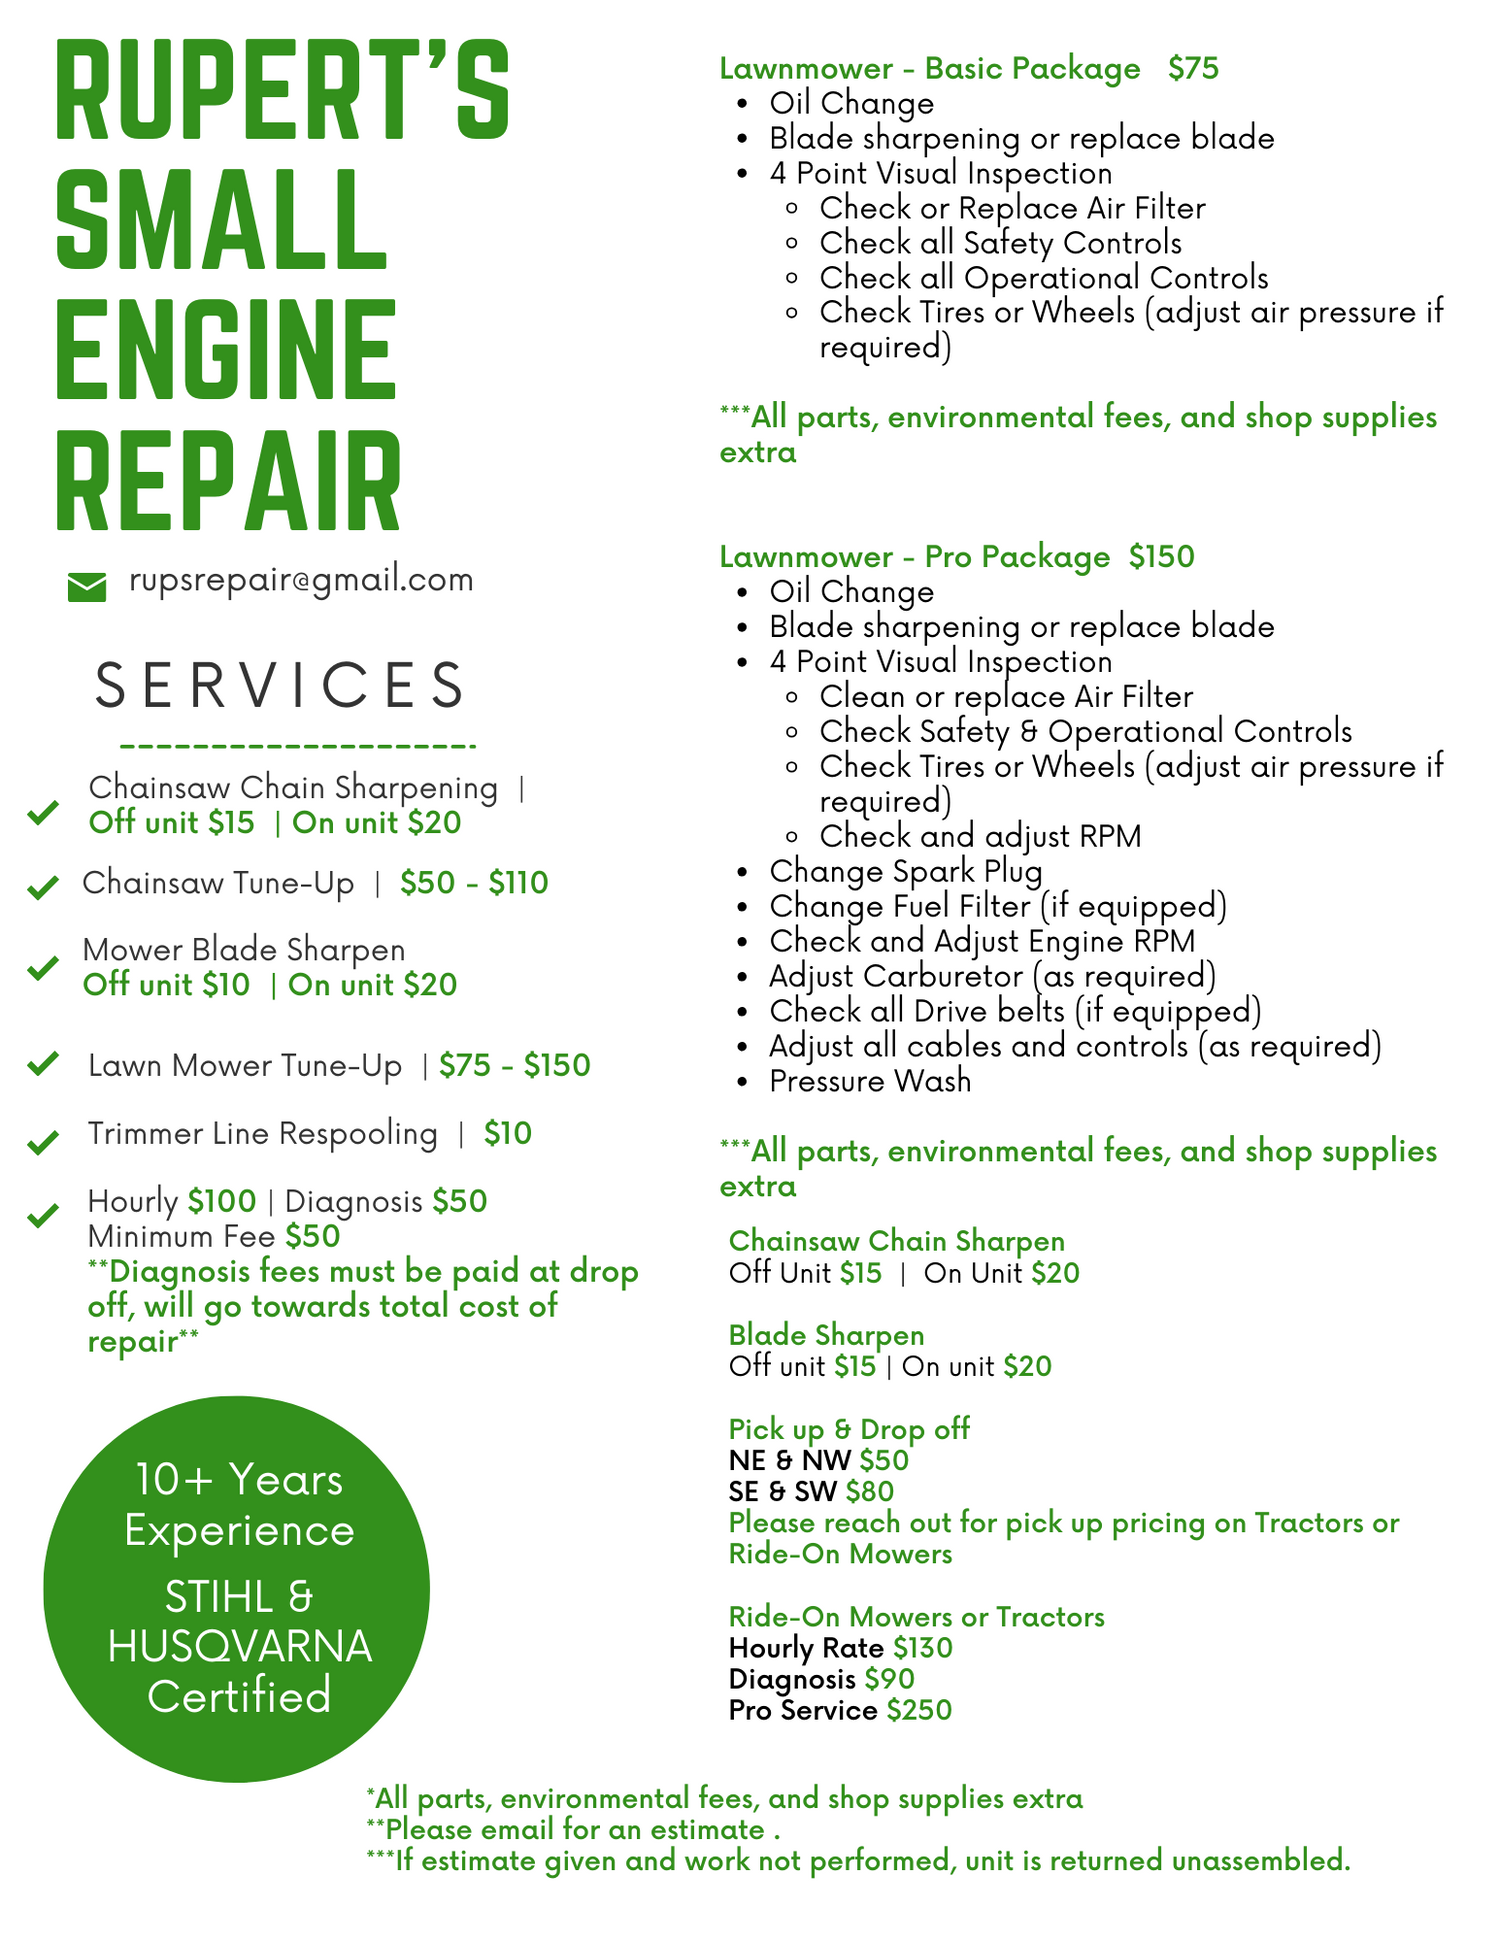 Repair and Maintain your Equipment